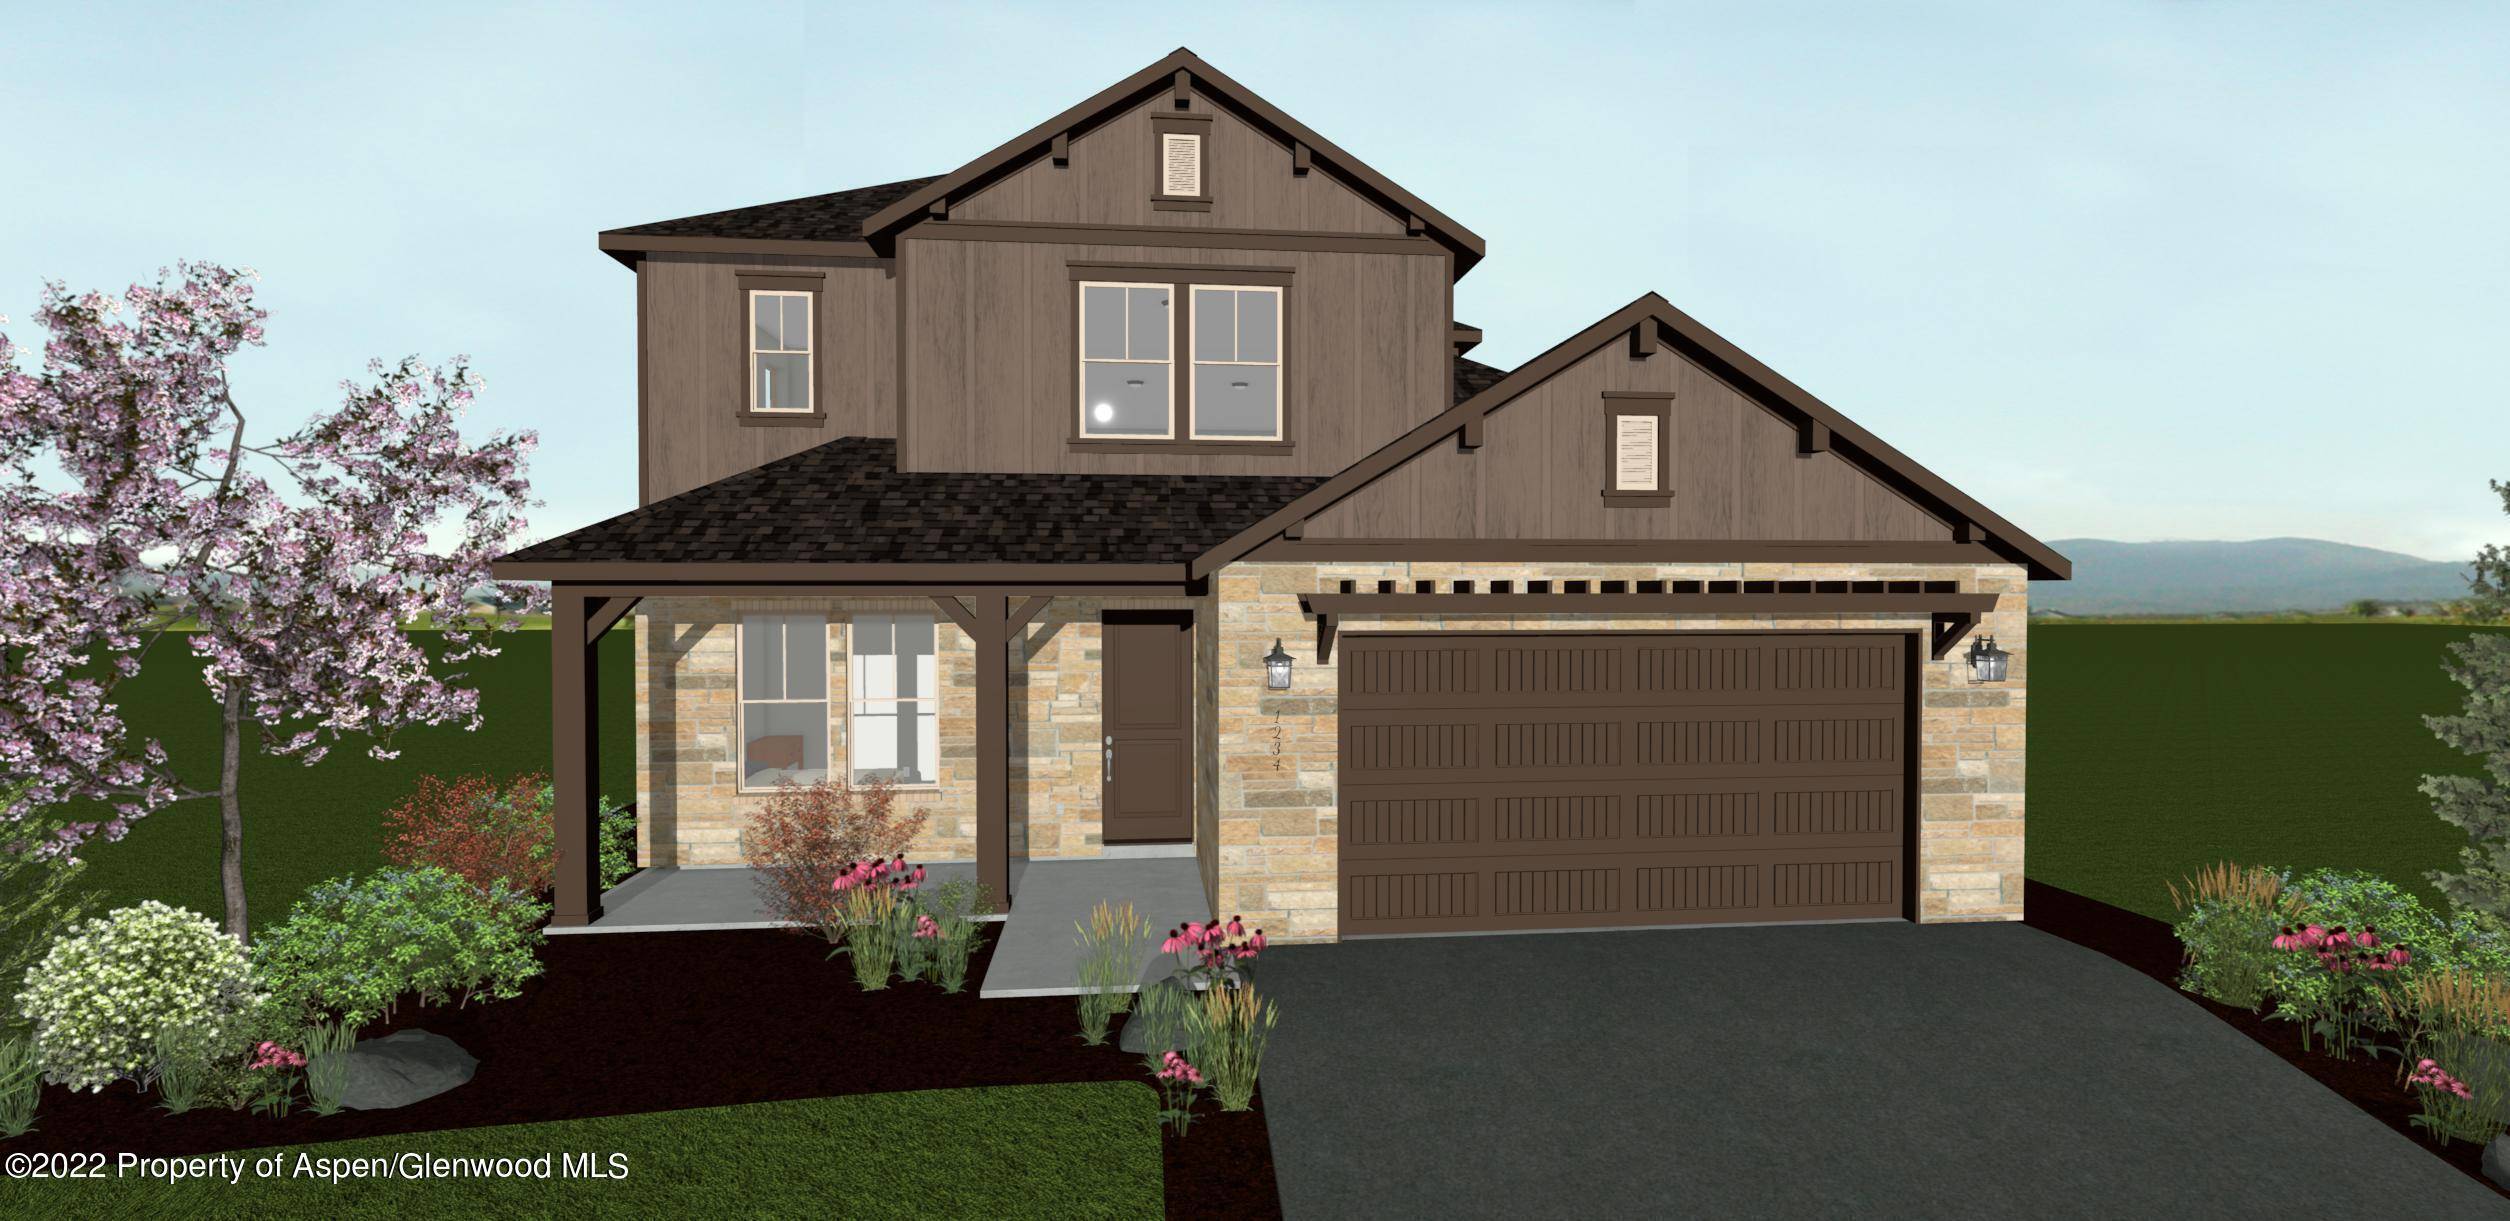 New construction in Glenwood Springs on a spacious lot near the river.